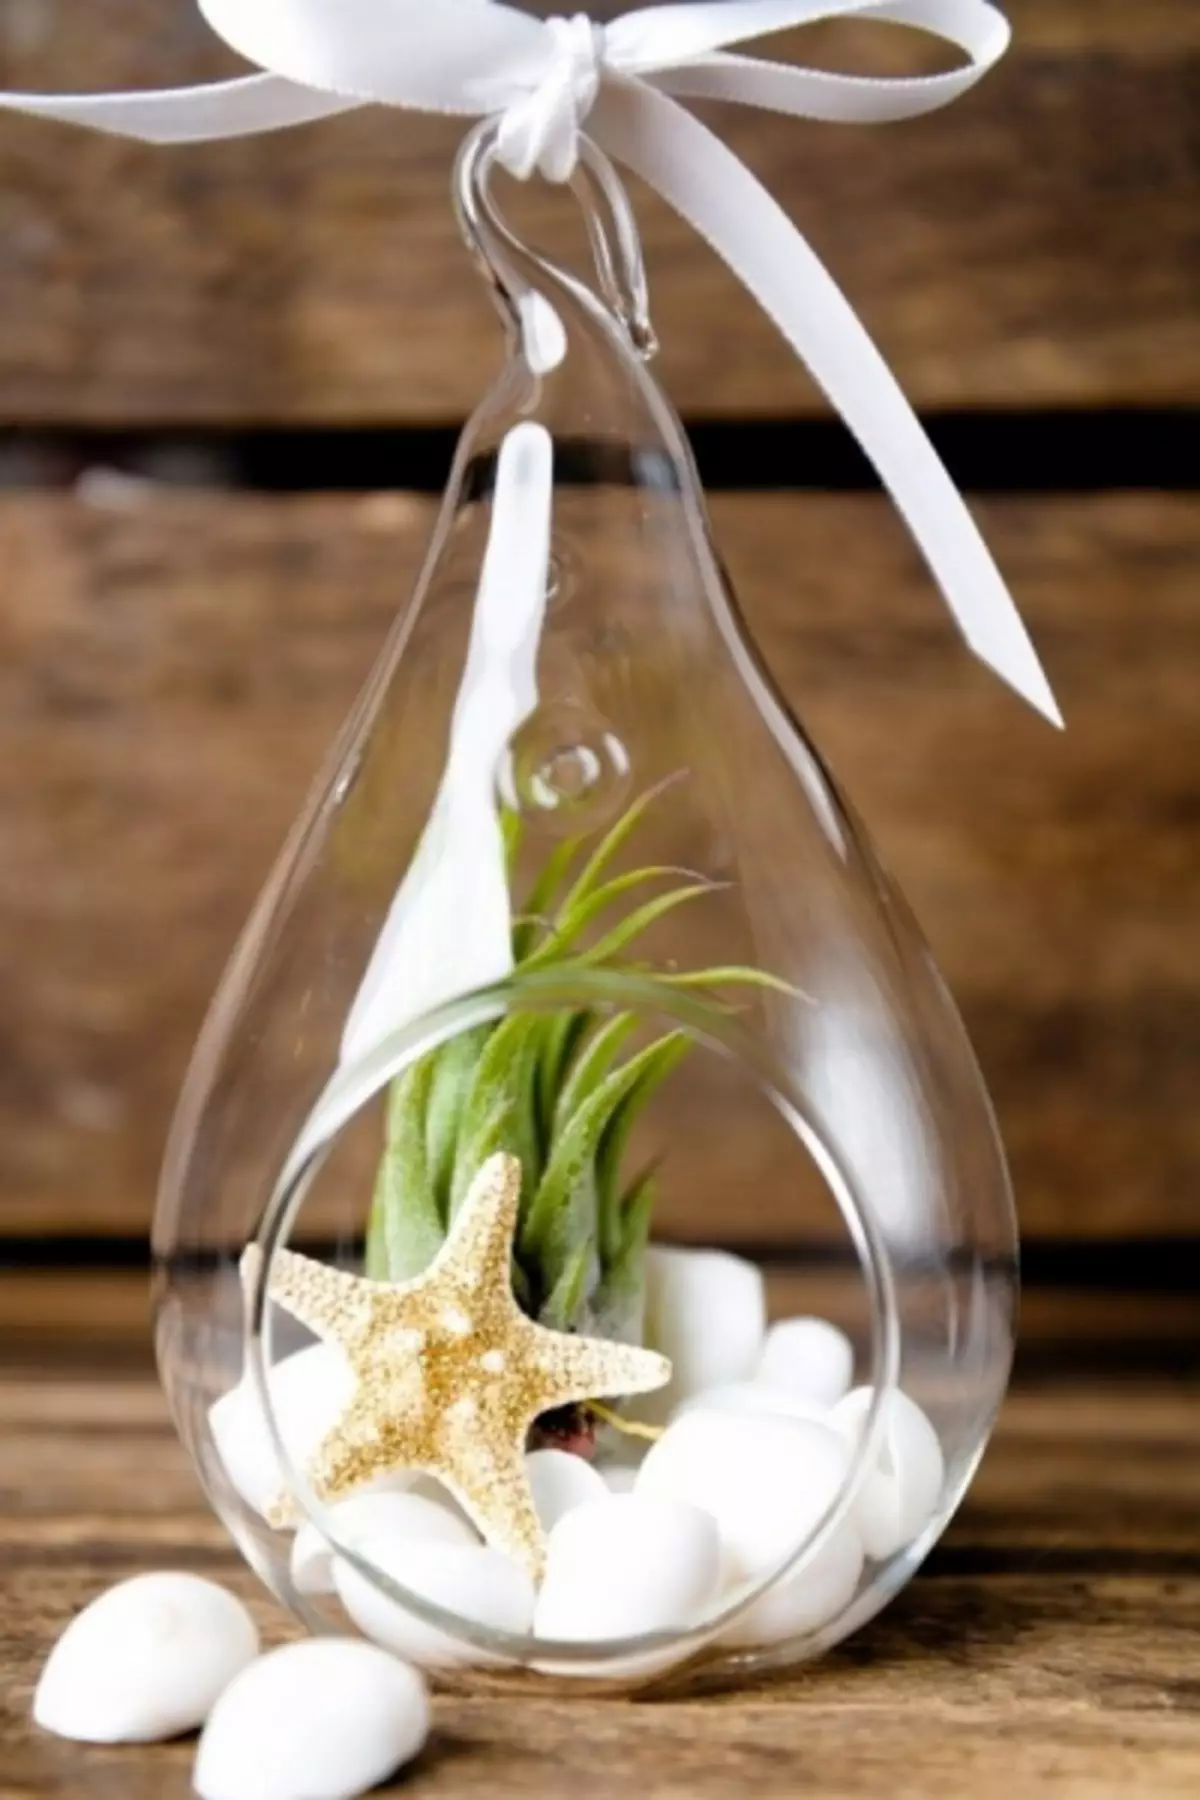 Air plants: what it is, care and ideas of the house decor (50 photos)